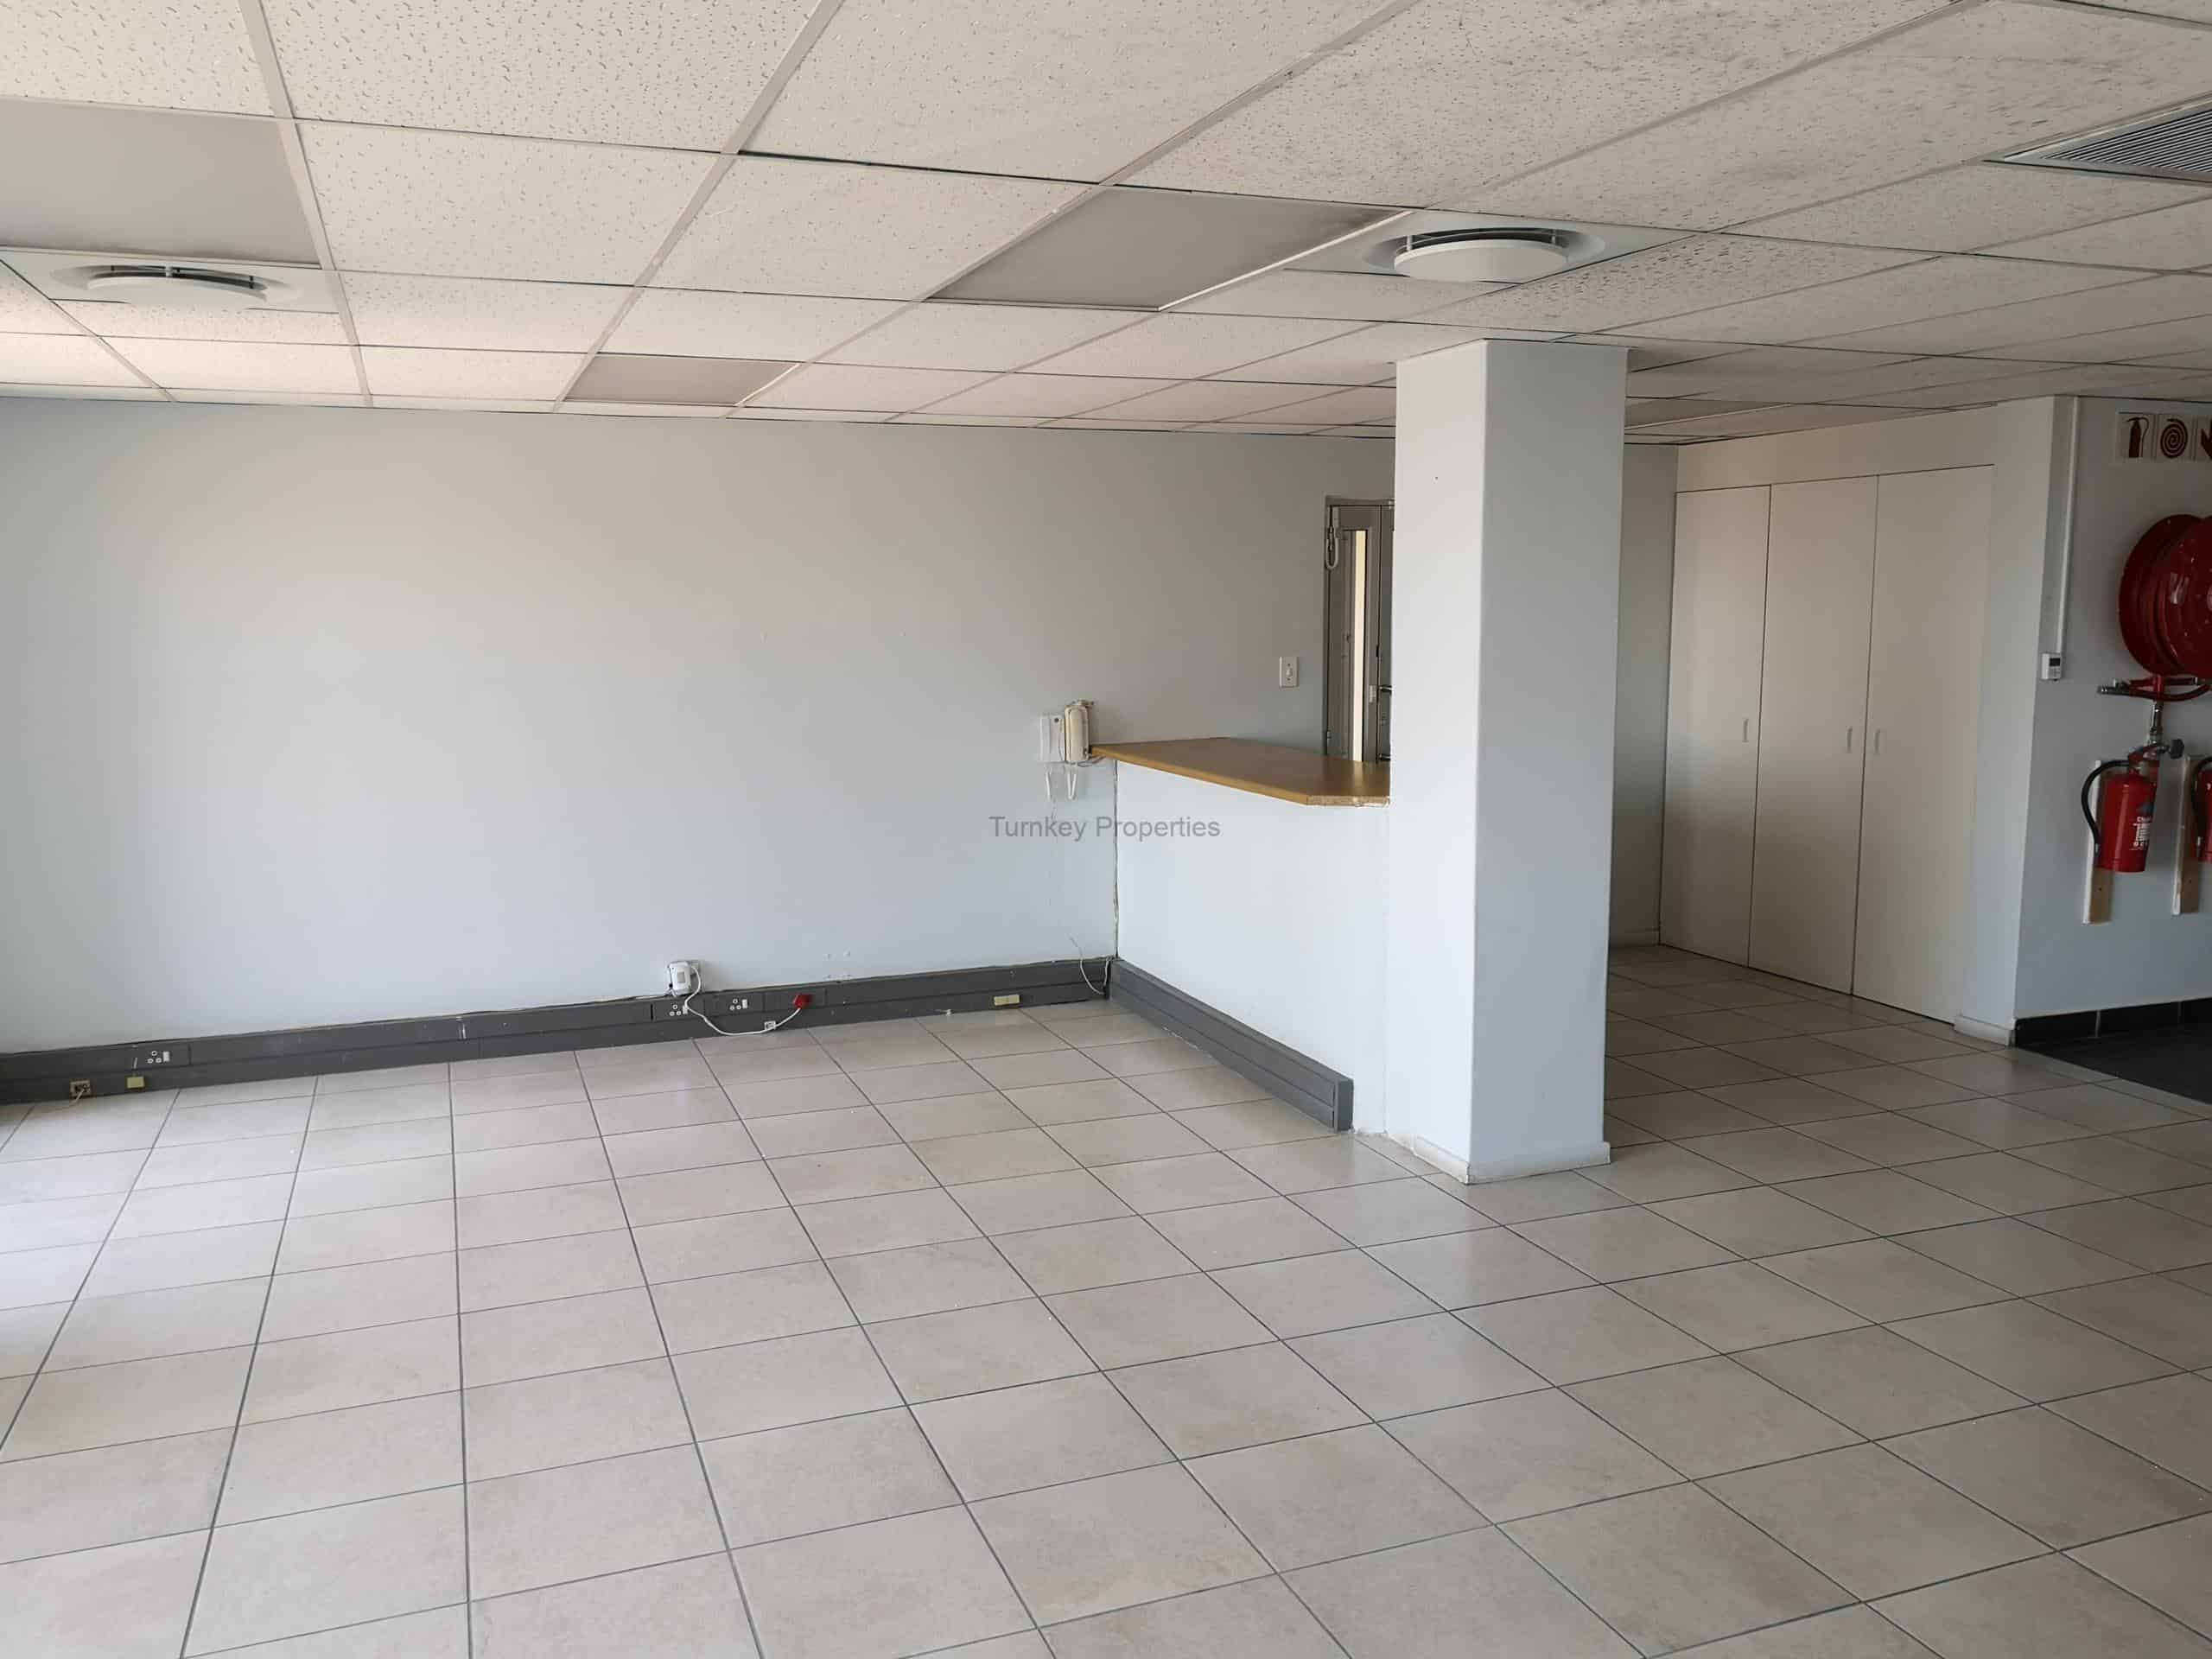 196m² office to let midrand Kyalami Business Park